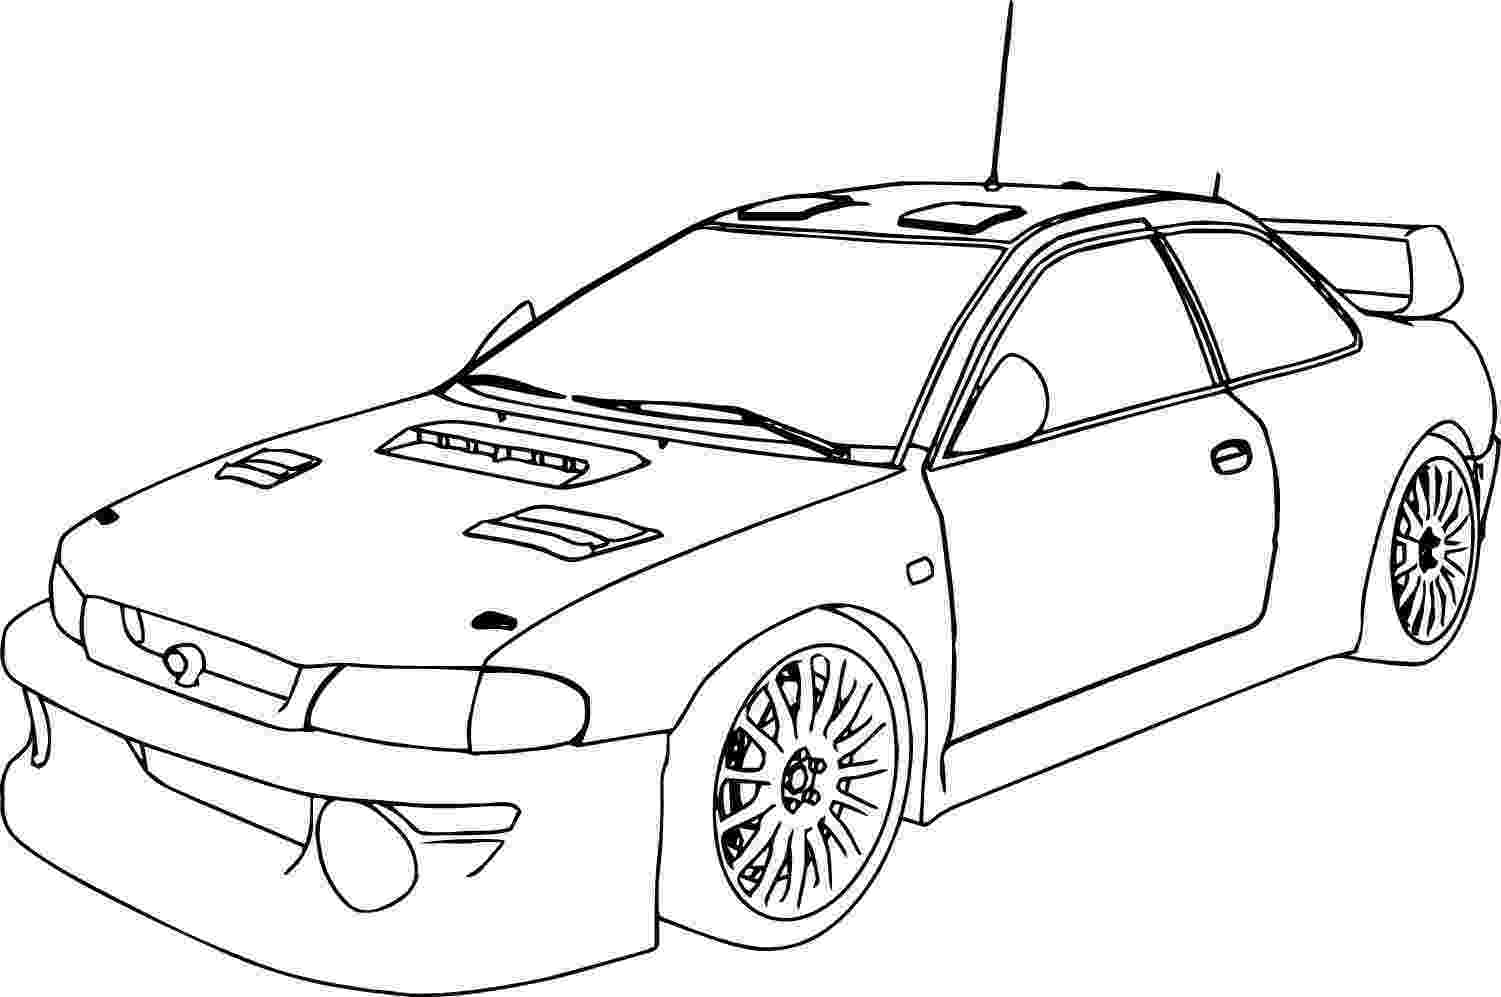 colouring pictures cars car coloring pages free printable coloring pages with pictures cars colouring 